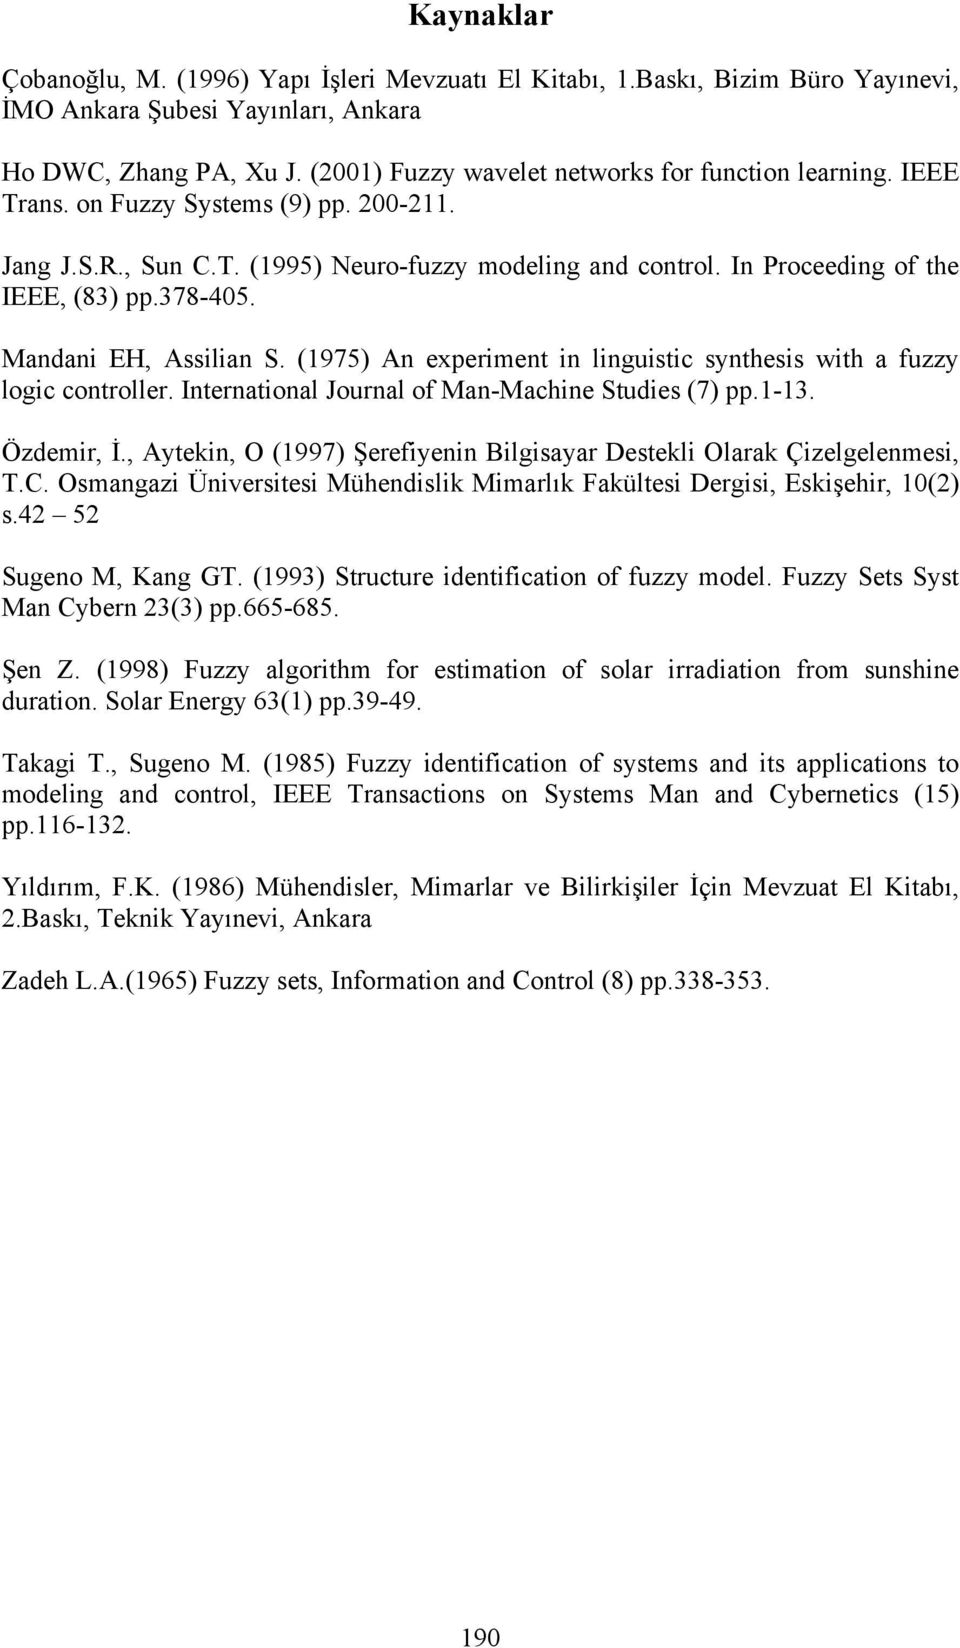 378-405. Mandani EH, Assilian S. (1975) An experiment in linguistic synthesis with a fuzzy logic controller. International Journal of Man-Machine Studies (7) pp.1-13. Özdemir, İ.